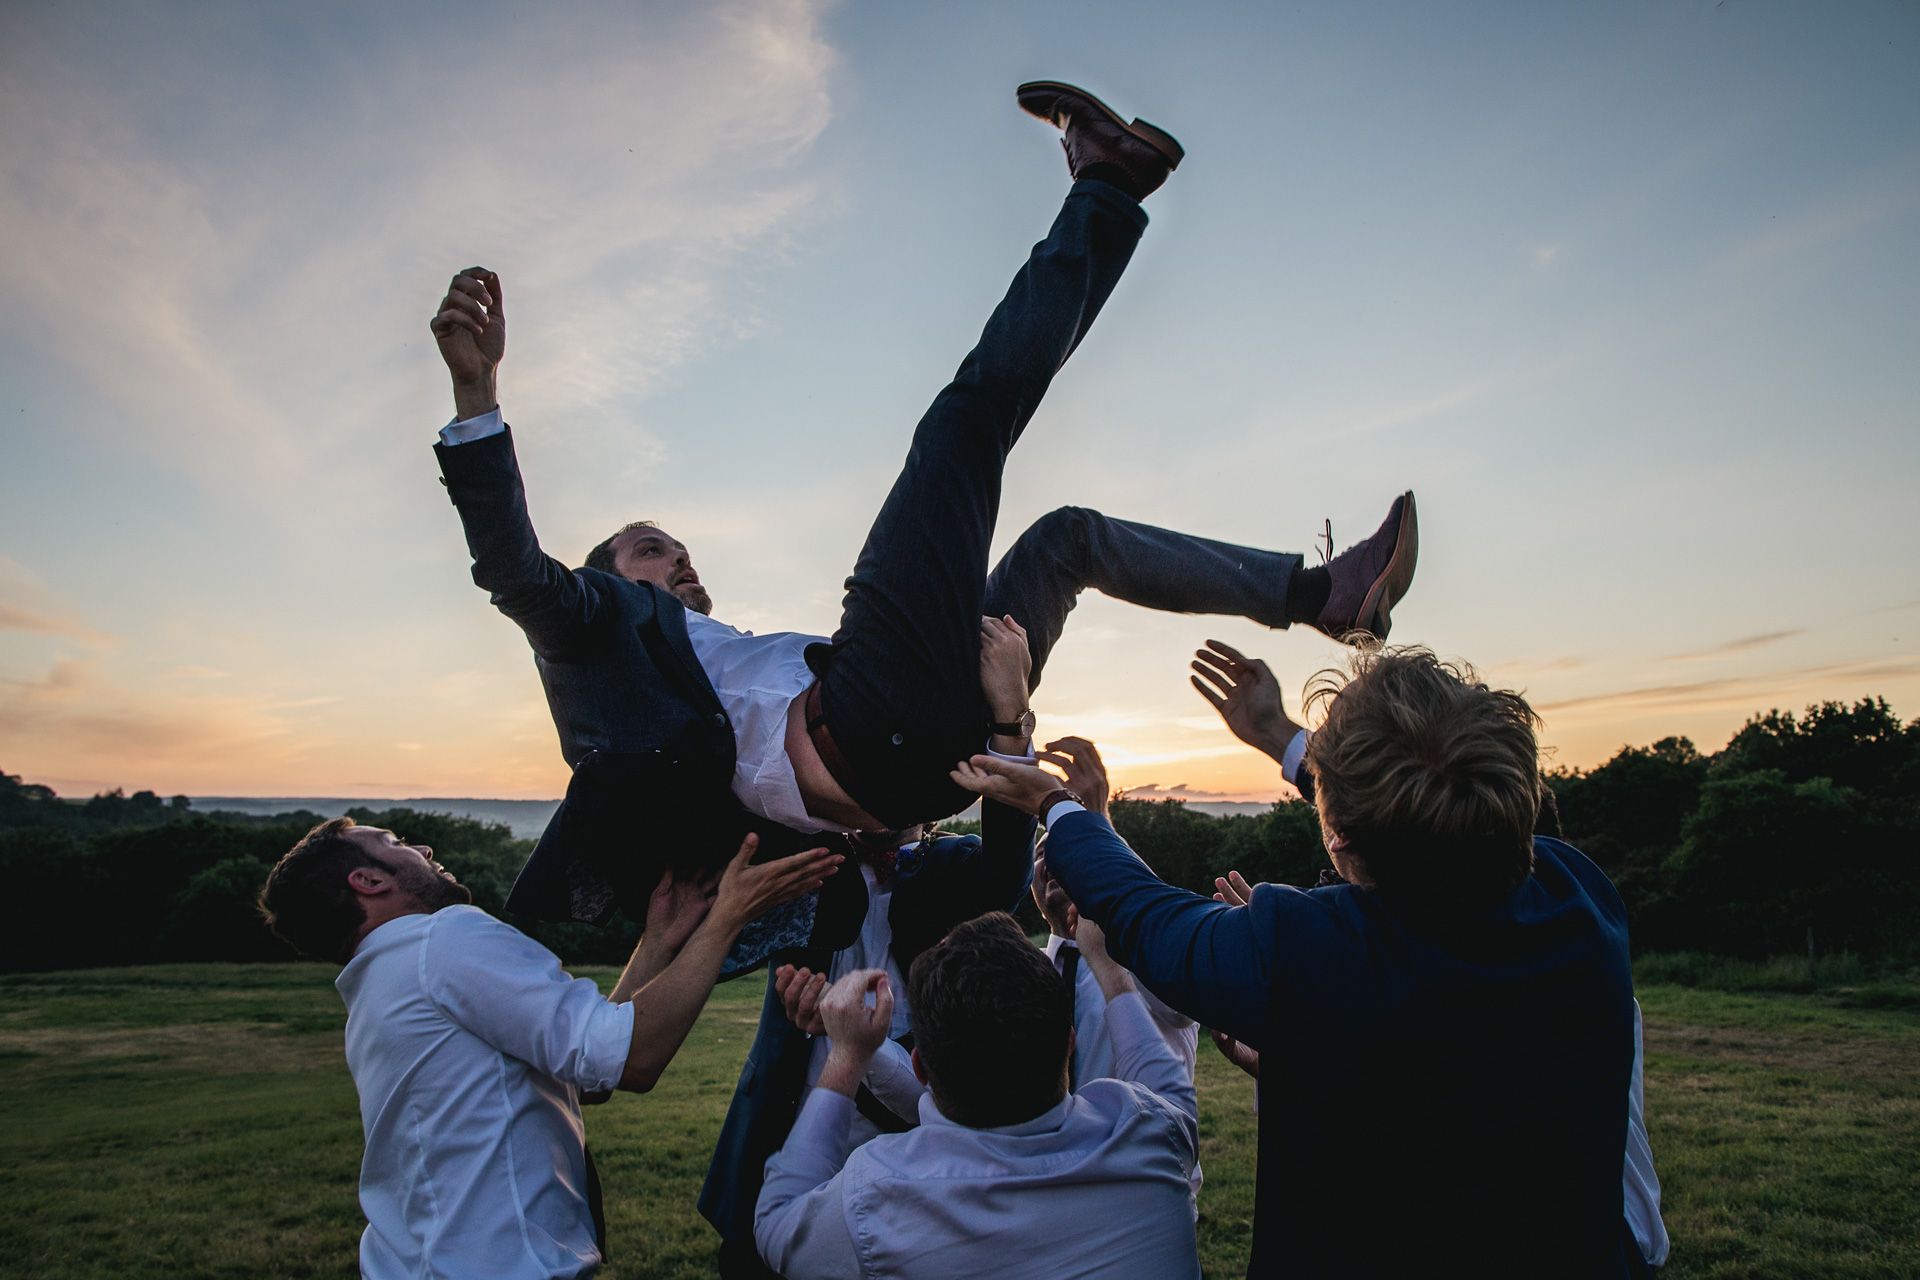 Wedding guests throwing groom up in the air 